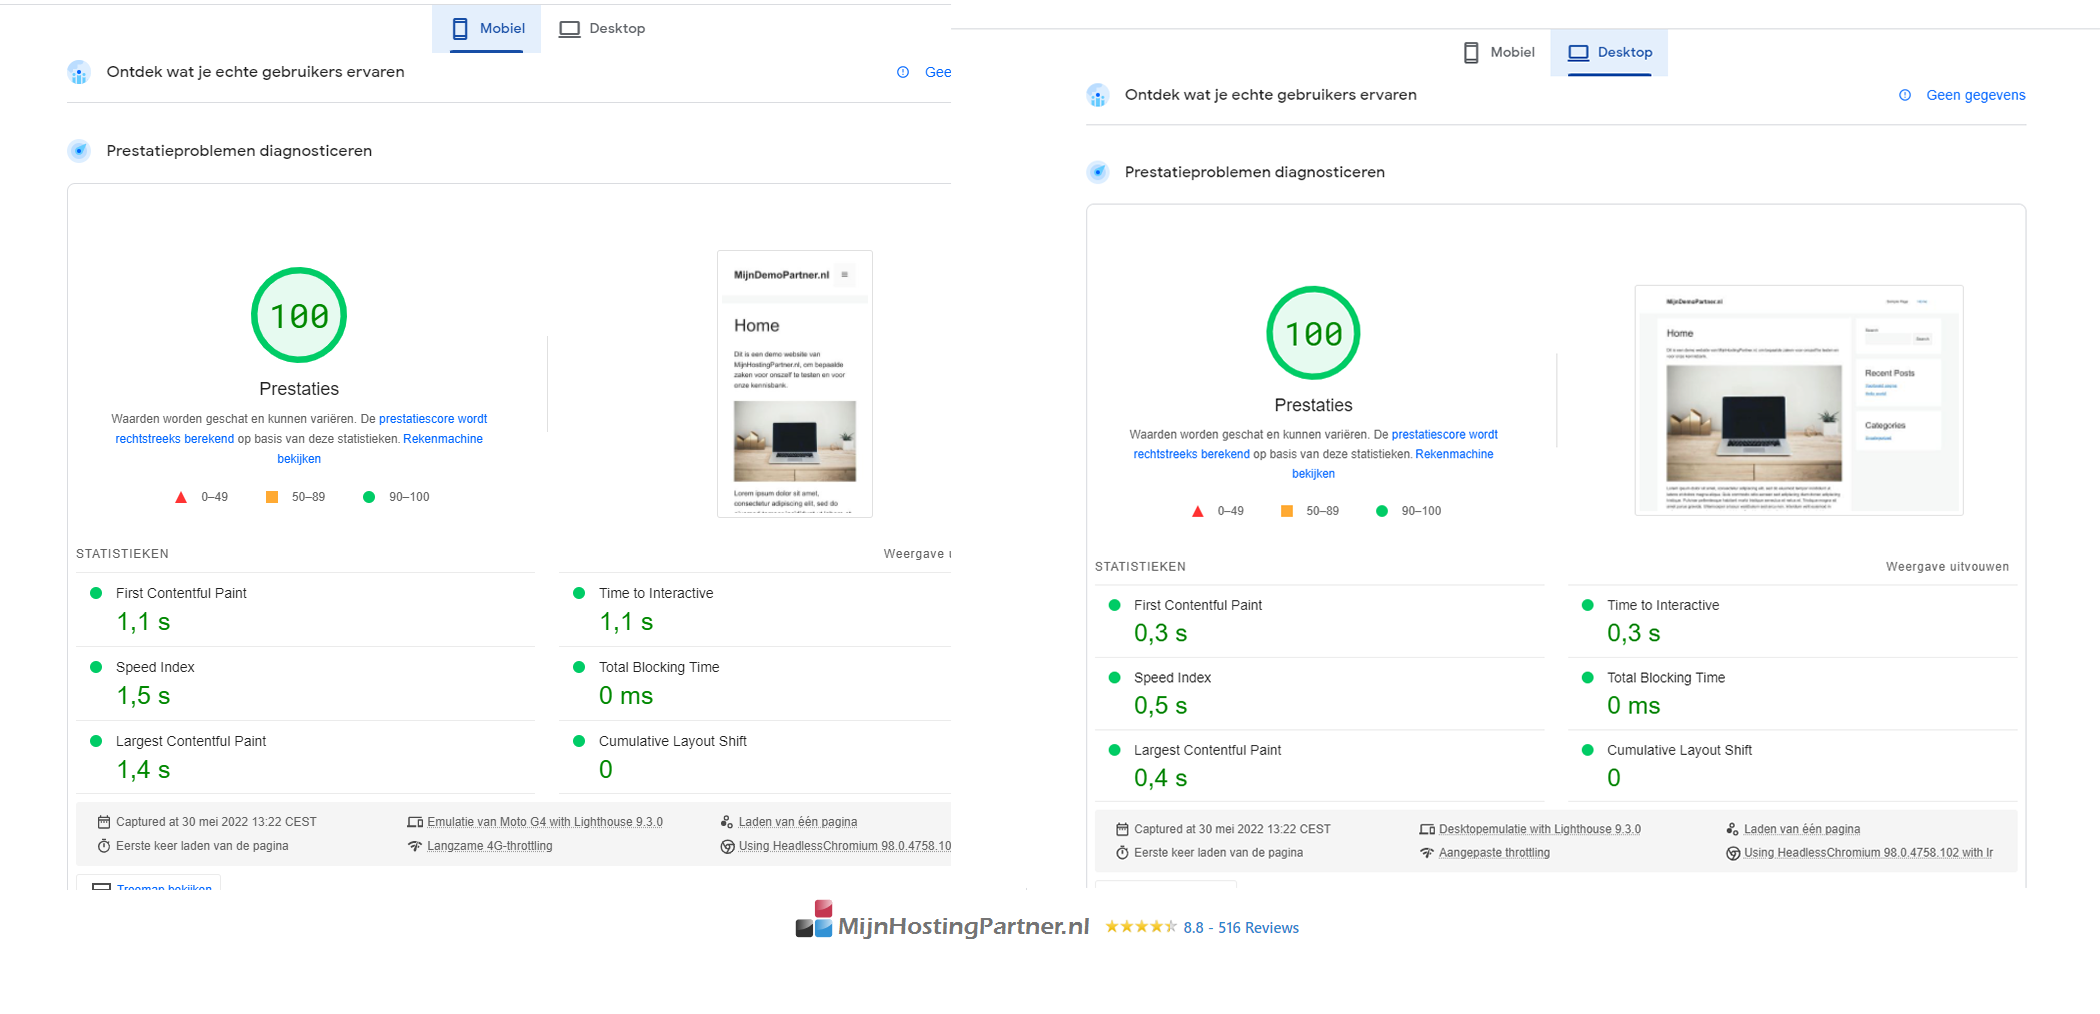 Score 100 out of 100 on Google PageSpeed Insights